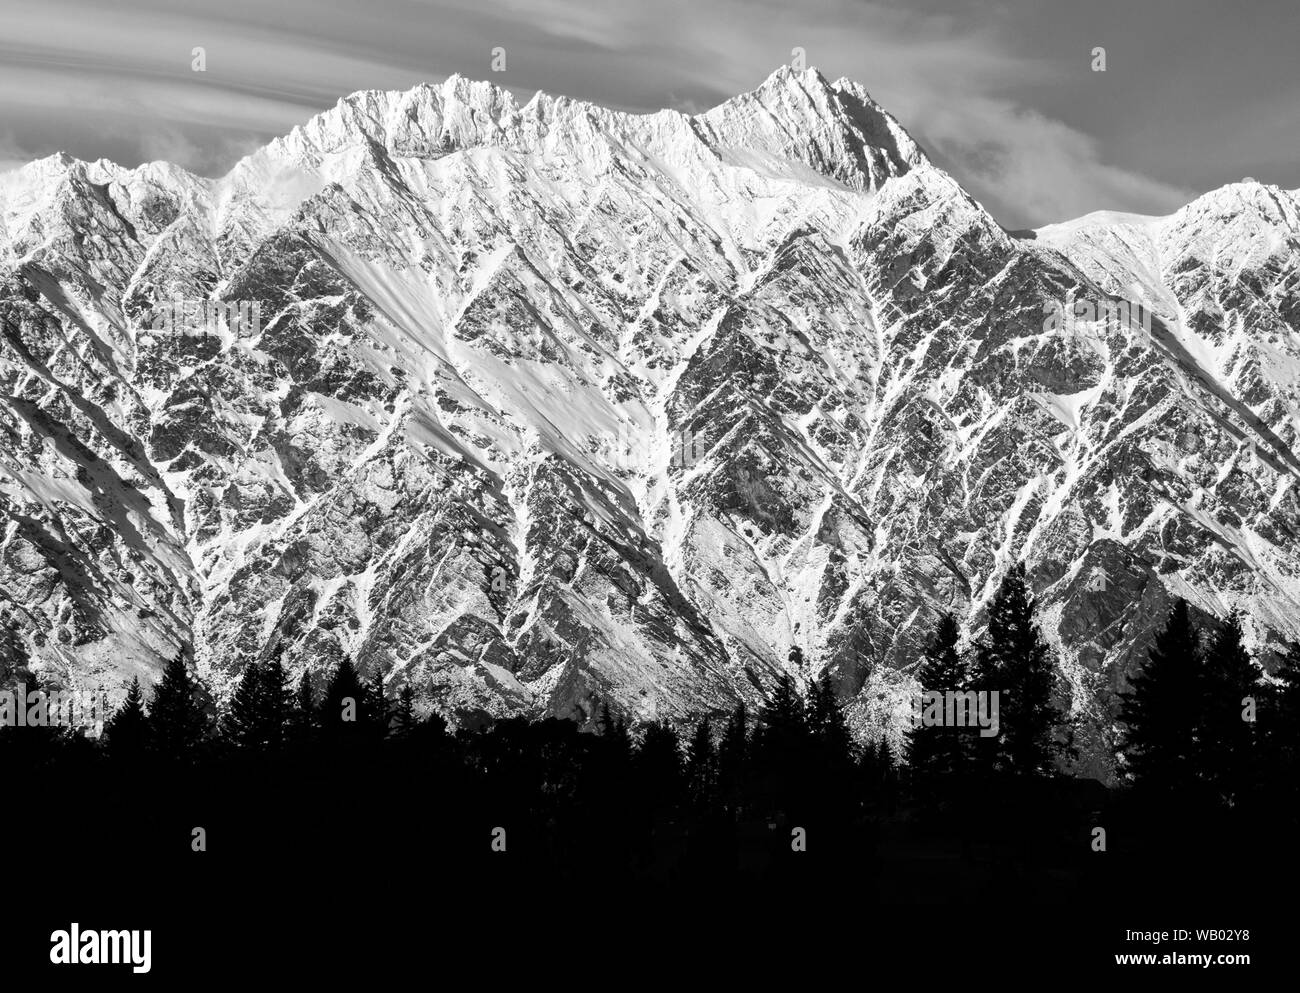 The Remarkables Mountain Range with trees silhouette in black and white in  Queenstown New Zealand Stock Photo